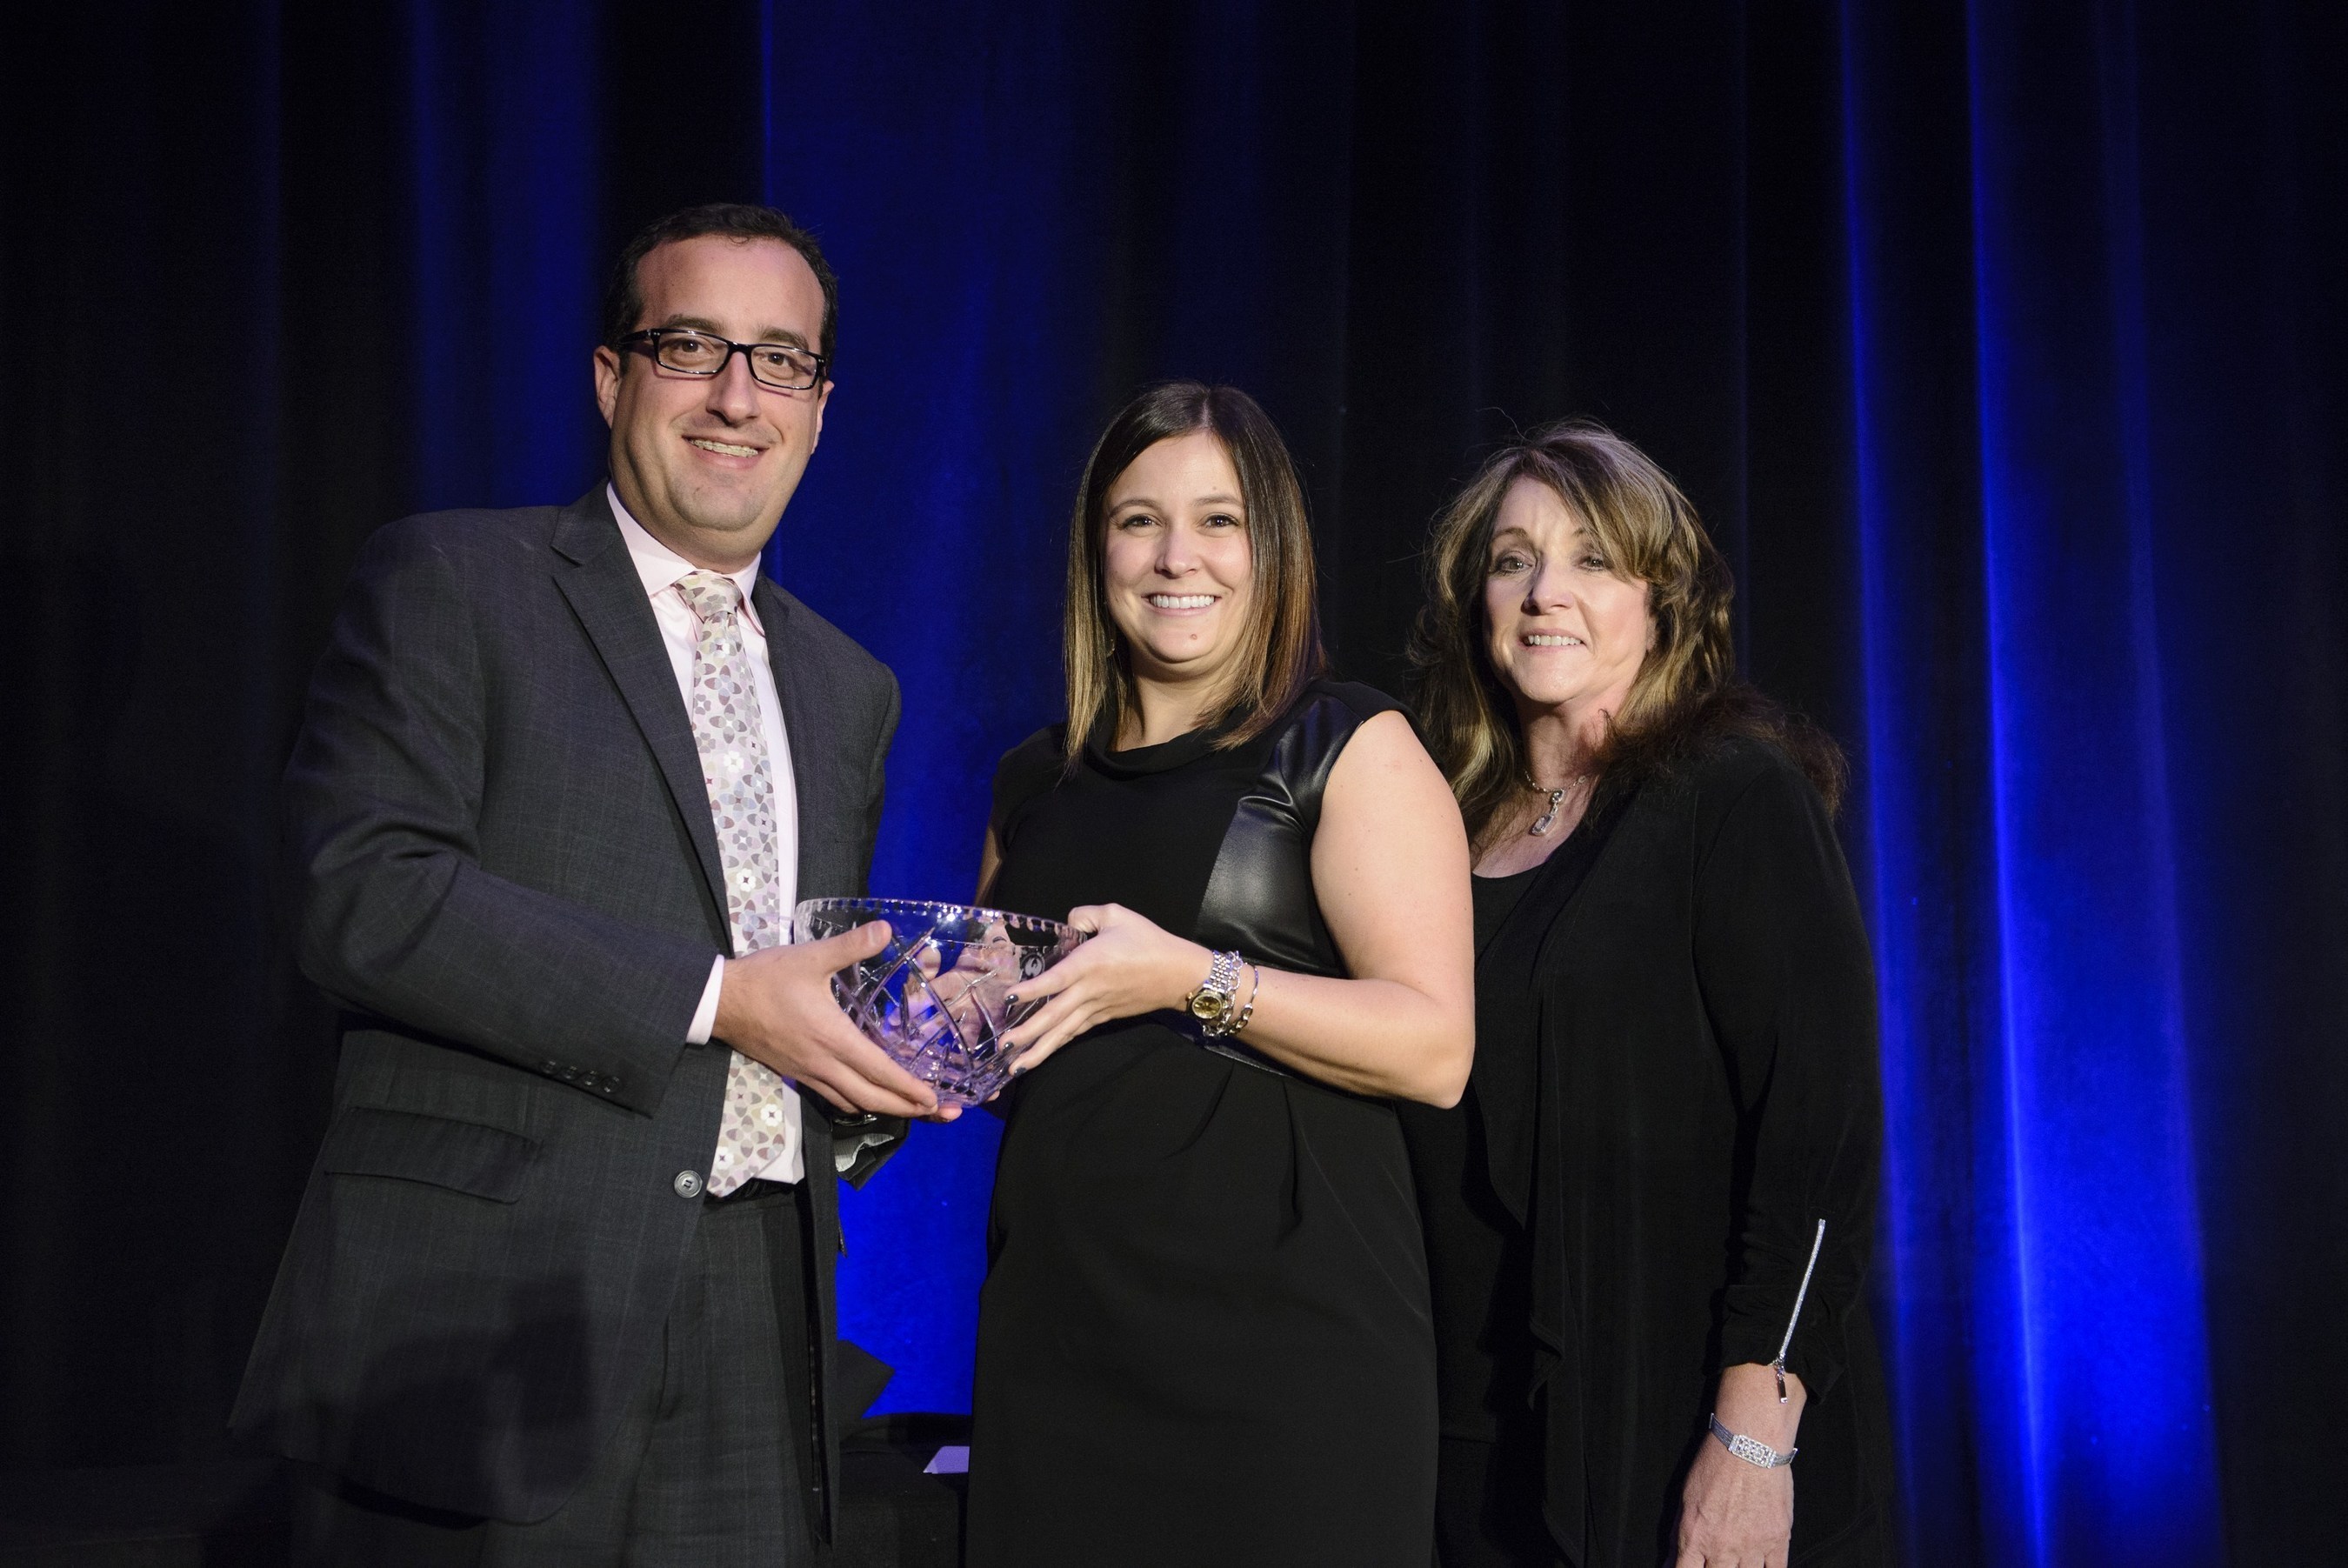 (Left to Right): Neil Hirsch, APR, President of PRSA Georgia Chapter and Manager, Global External Communications with Novelis presents the Best of Phoenix Award to Lindsay Ash with MSLGROUP Atlanta. Also pictured is Juliann Kaiser, APR of Kaiser Marketing Group and a Past President of PRSA Georgia.